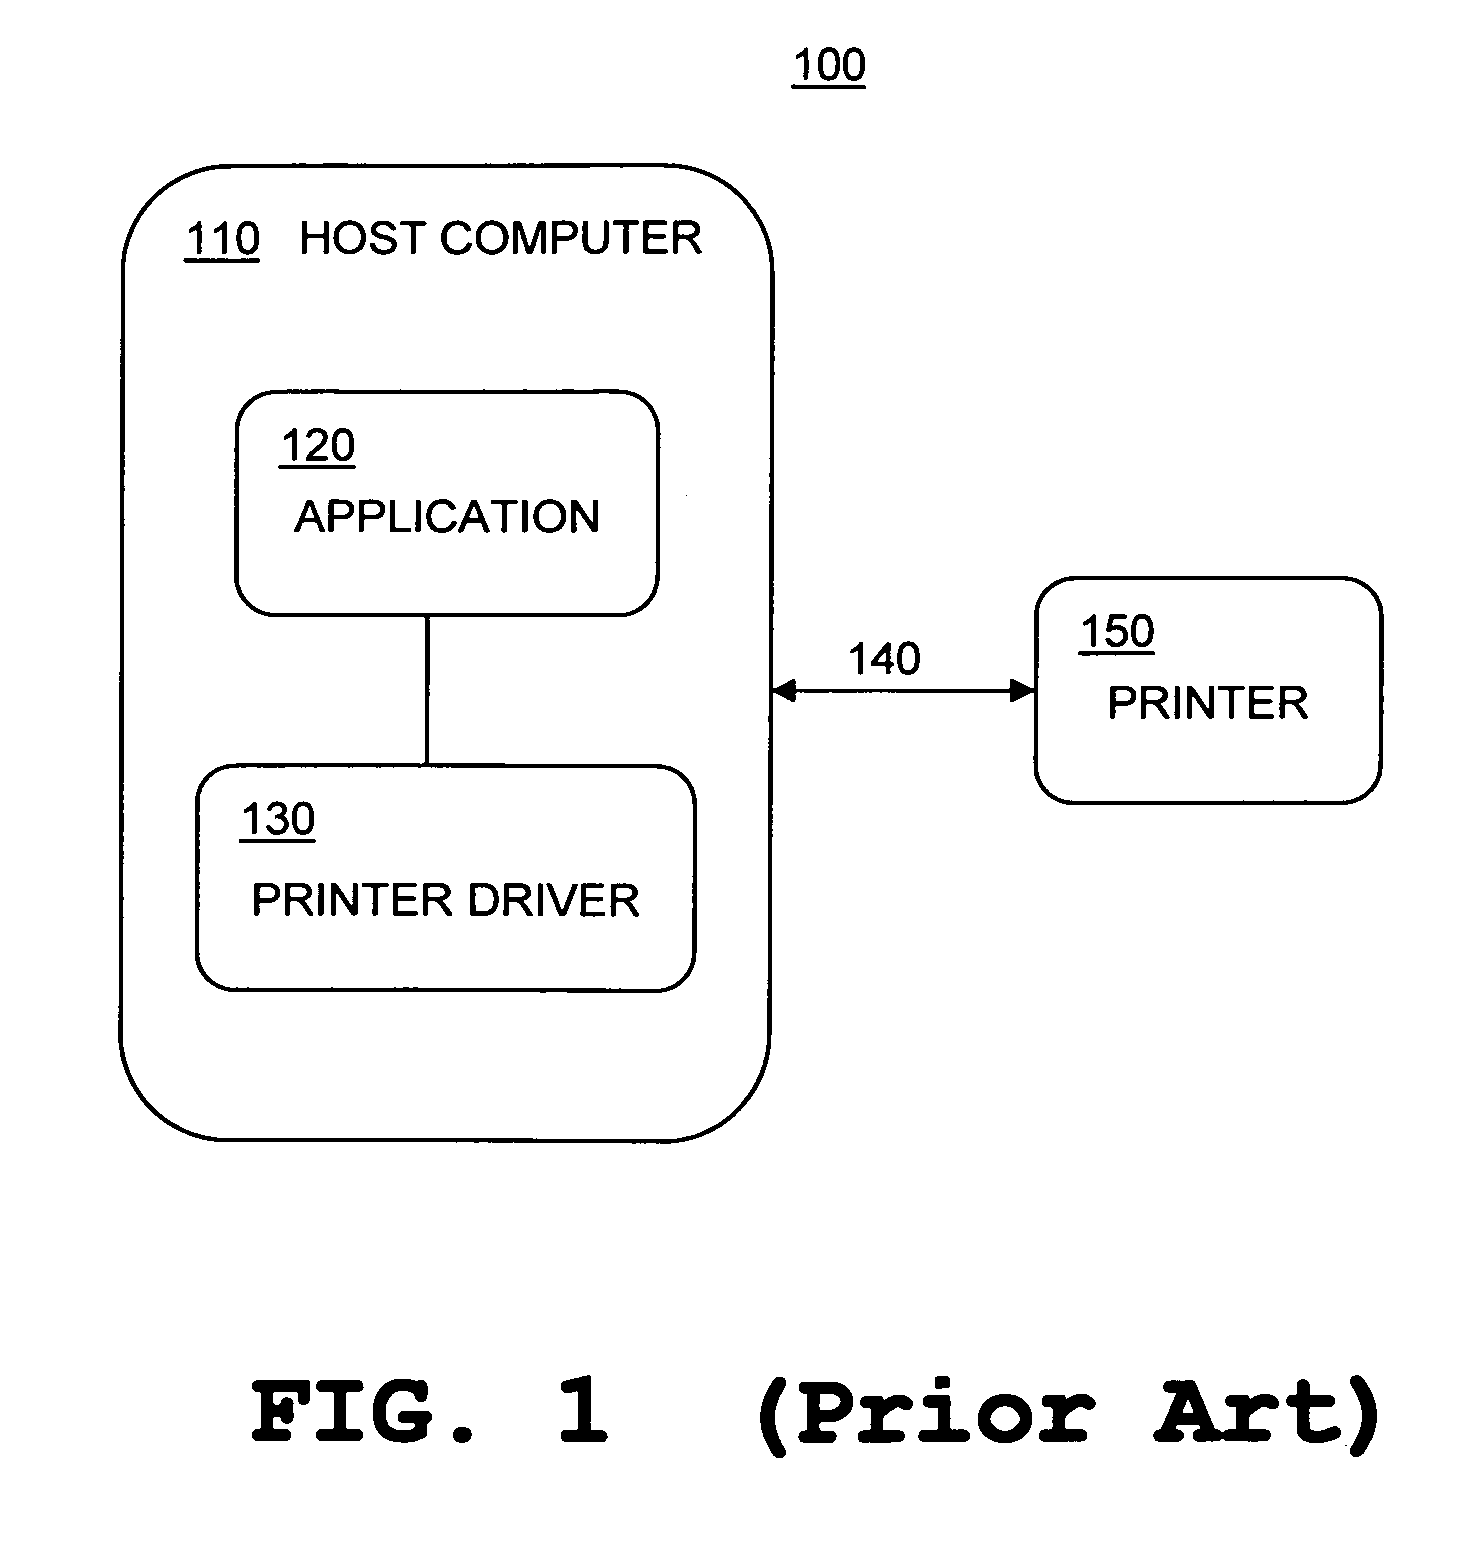 Method to change USB device descriptors from host to emulate a new device